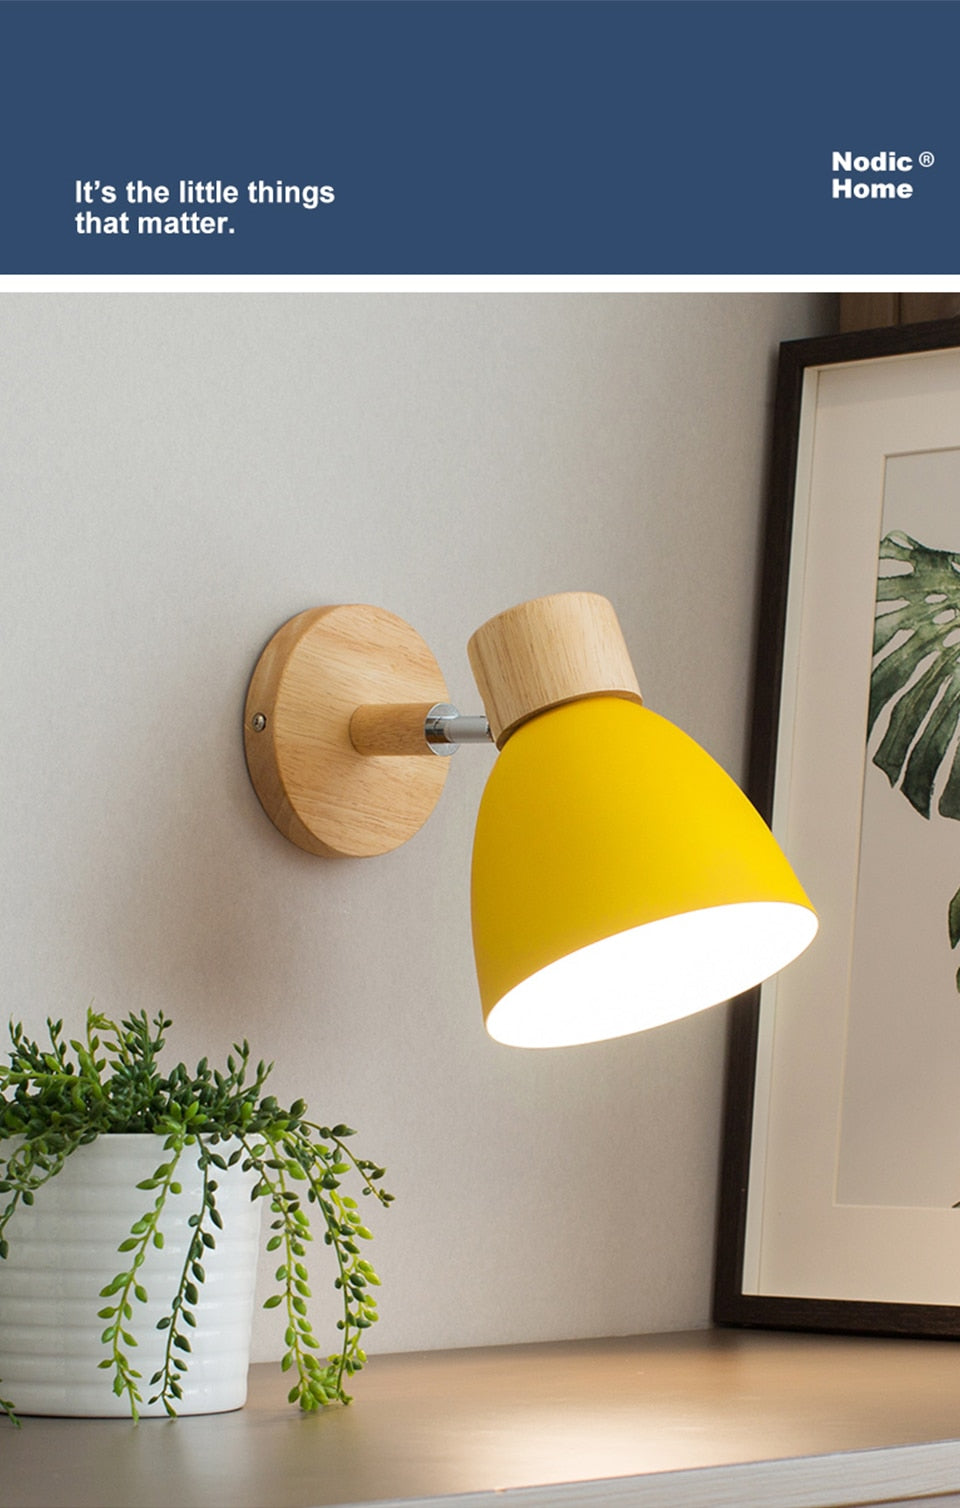 Wooden Wall lights bedside wall Lamp Nordic Wall Sconce for bedroom reading 6 color Macaroon steering Head E27 Home Lighting